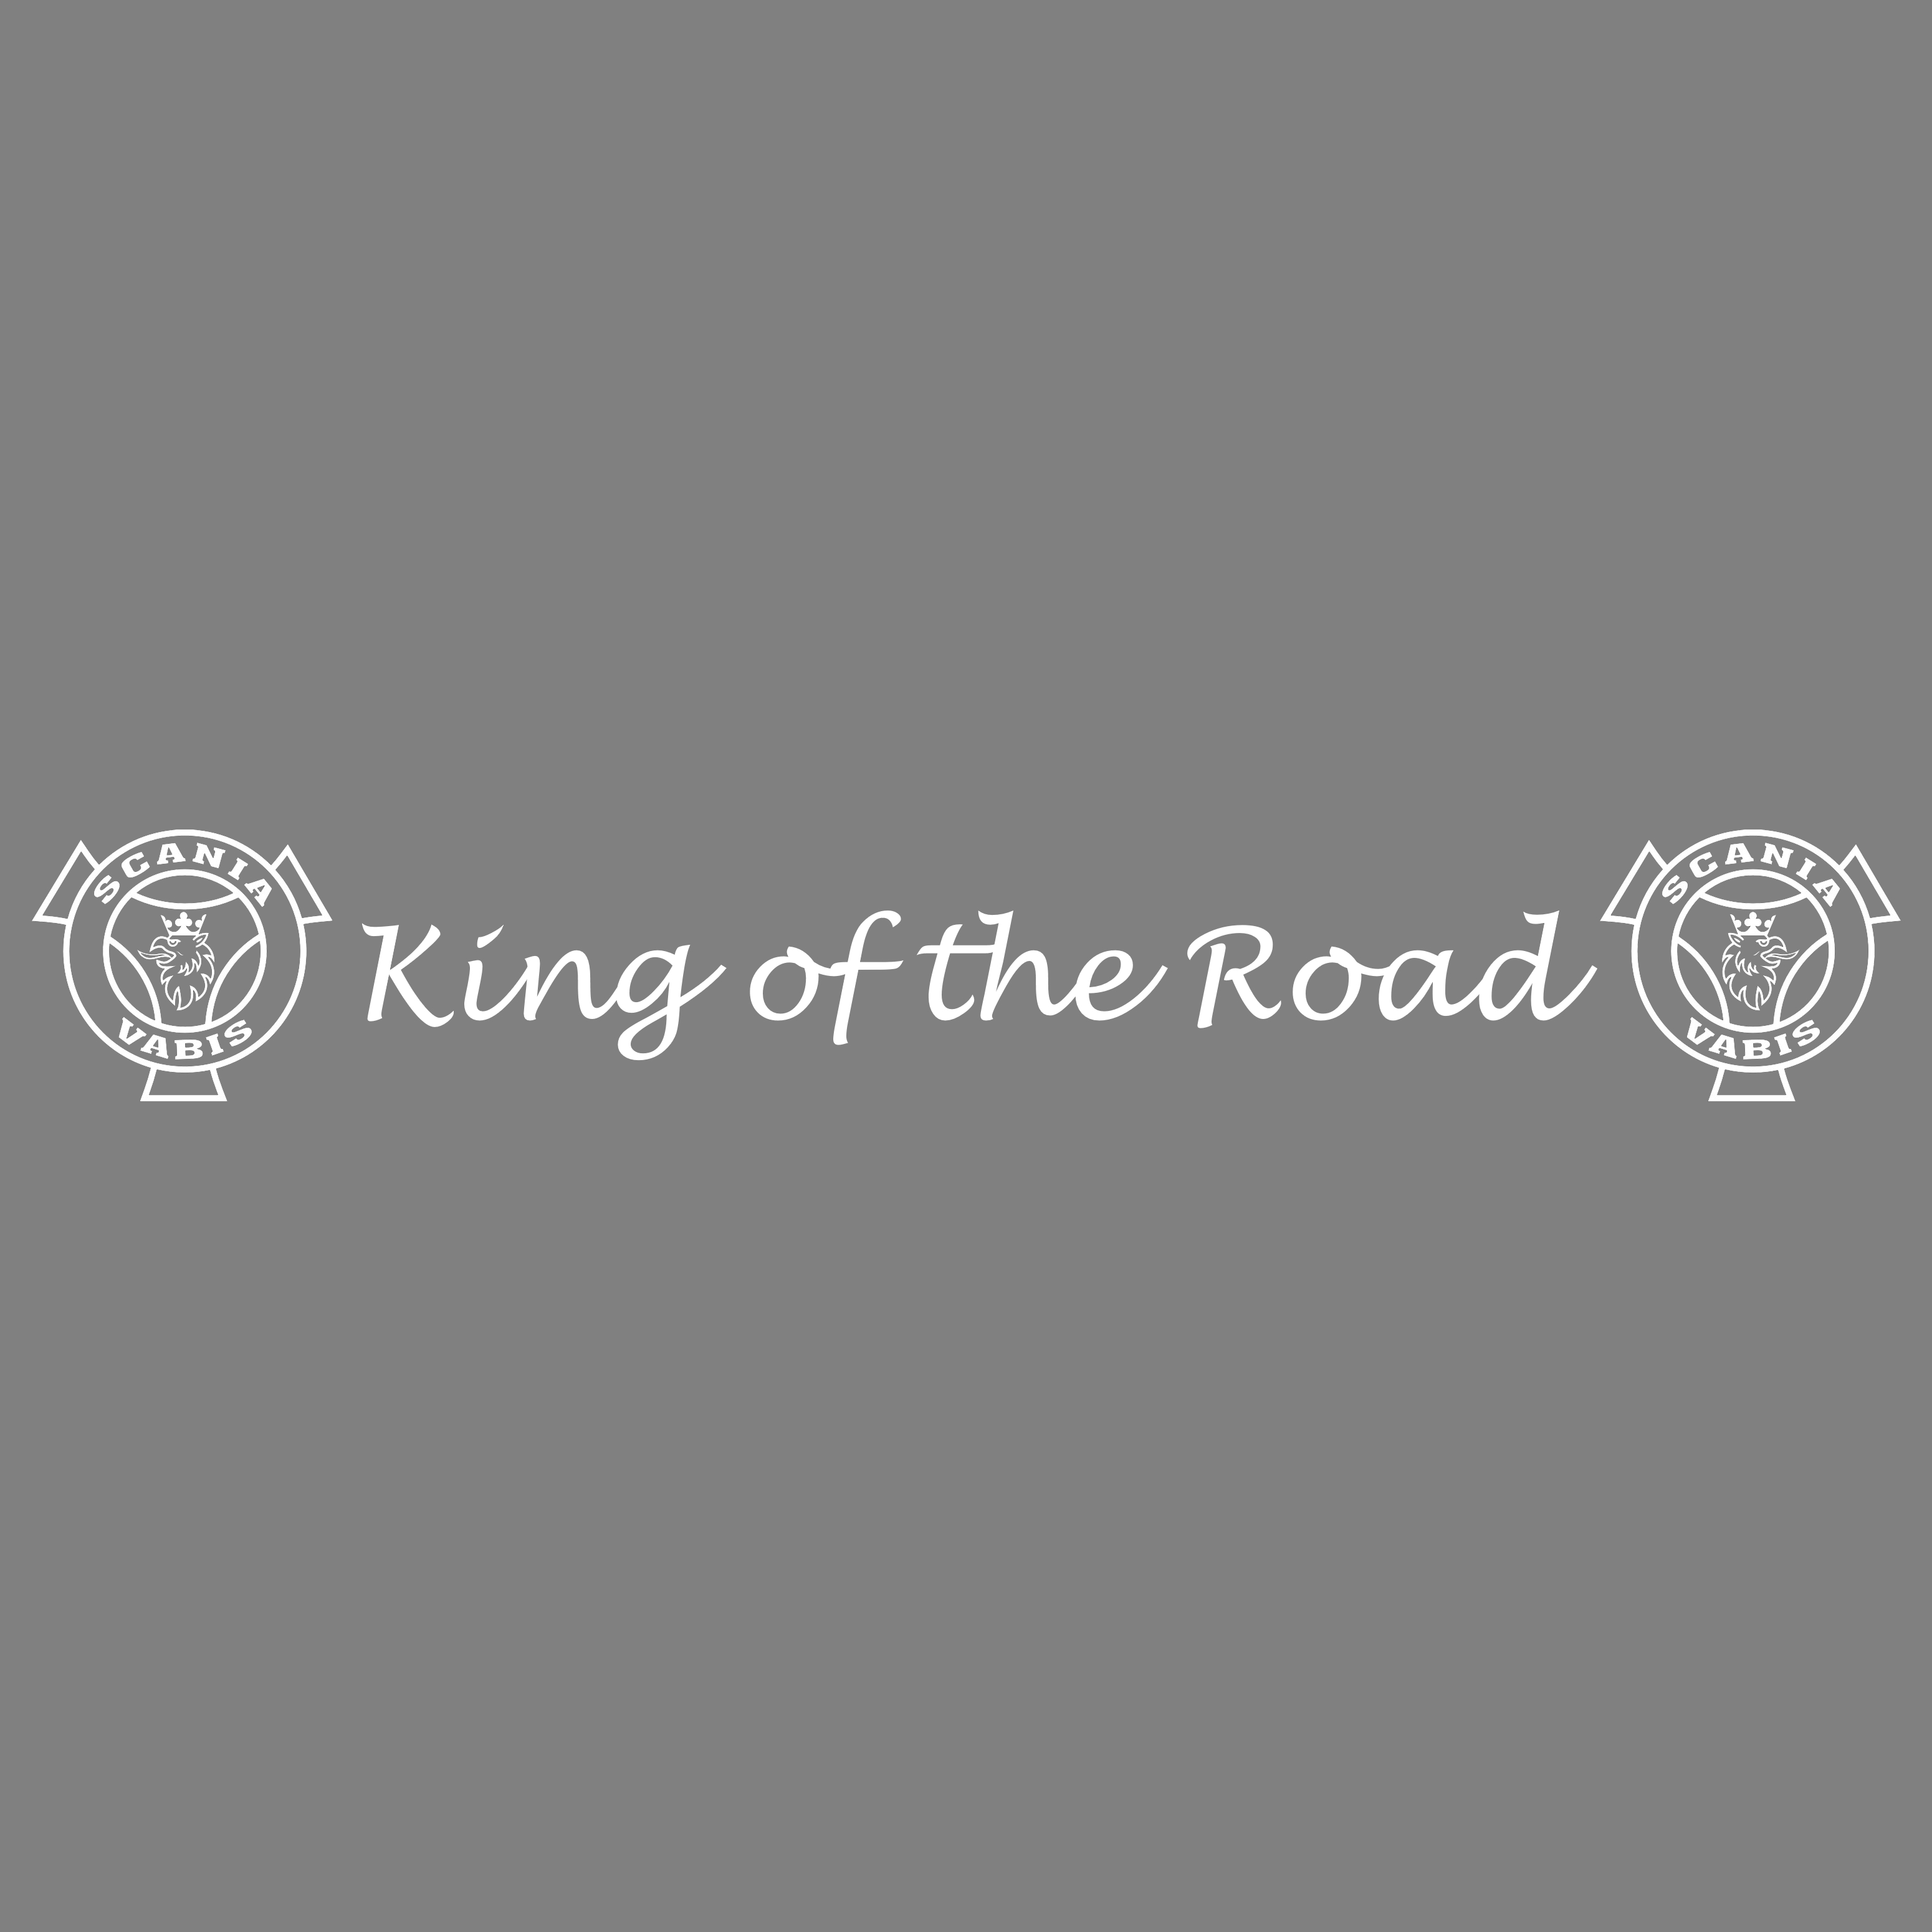 King of the Road + scania vabis